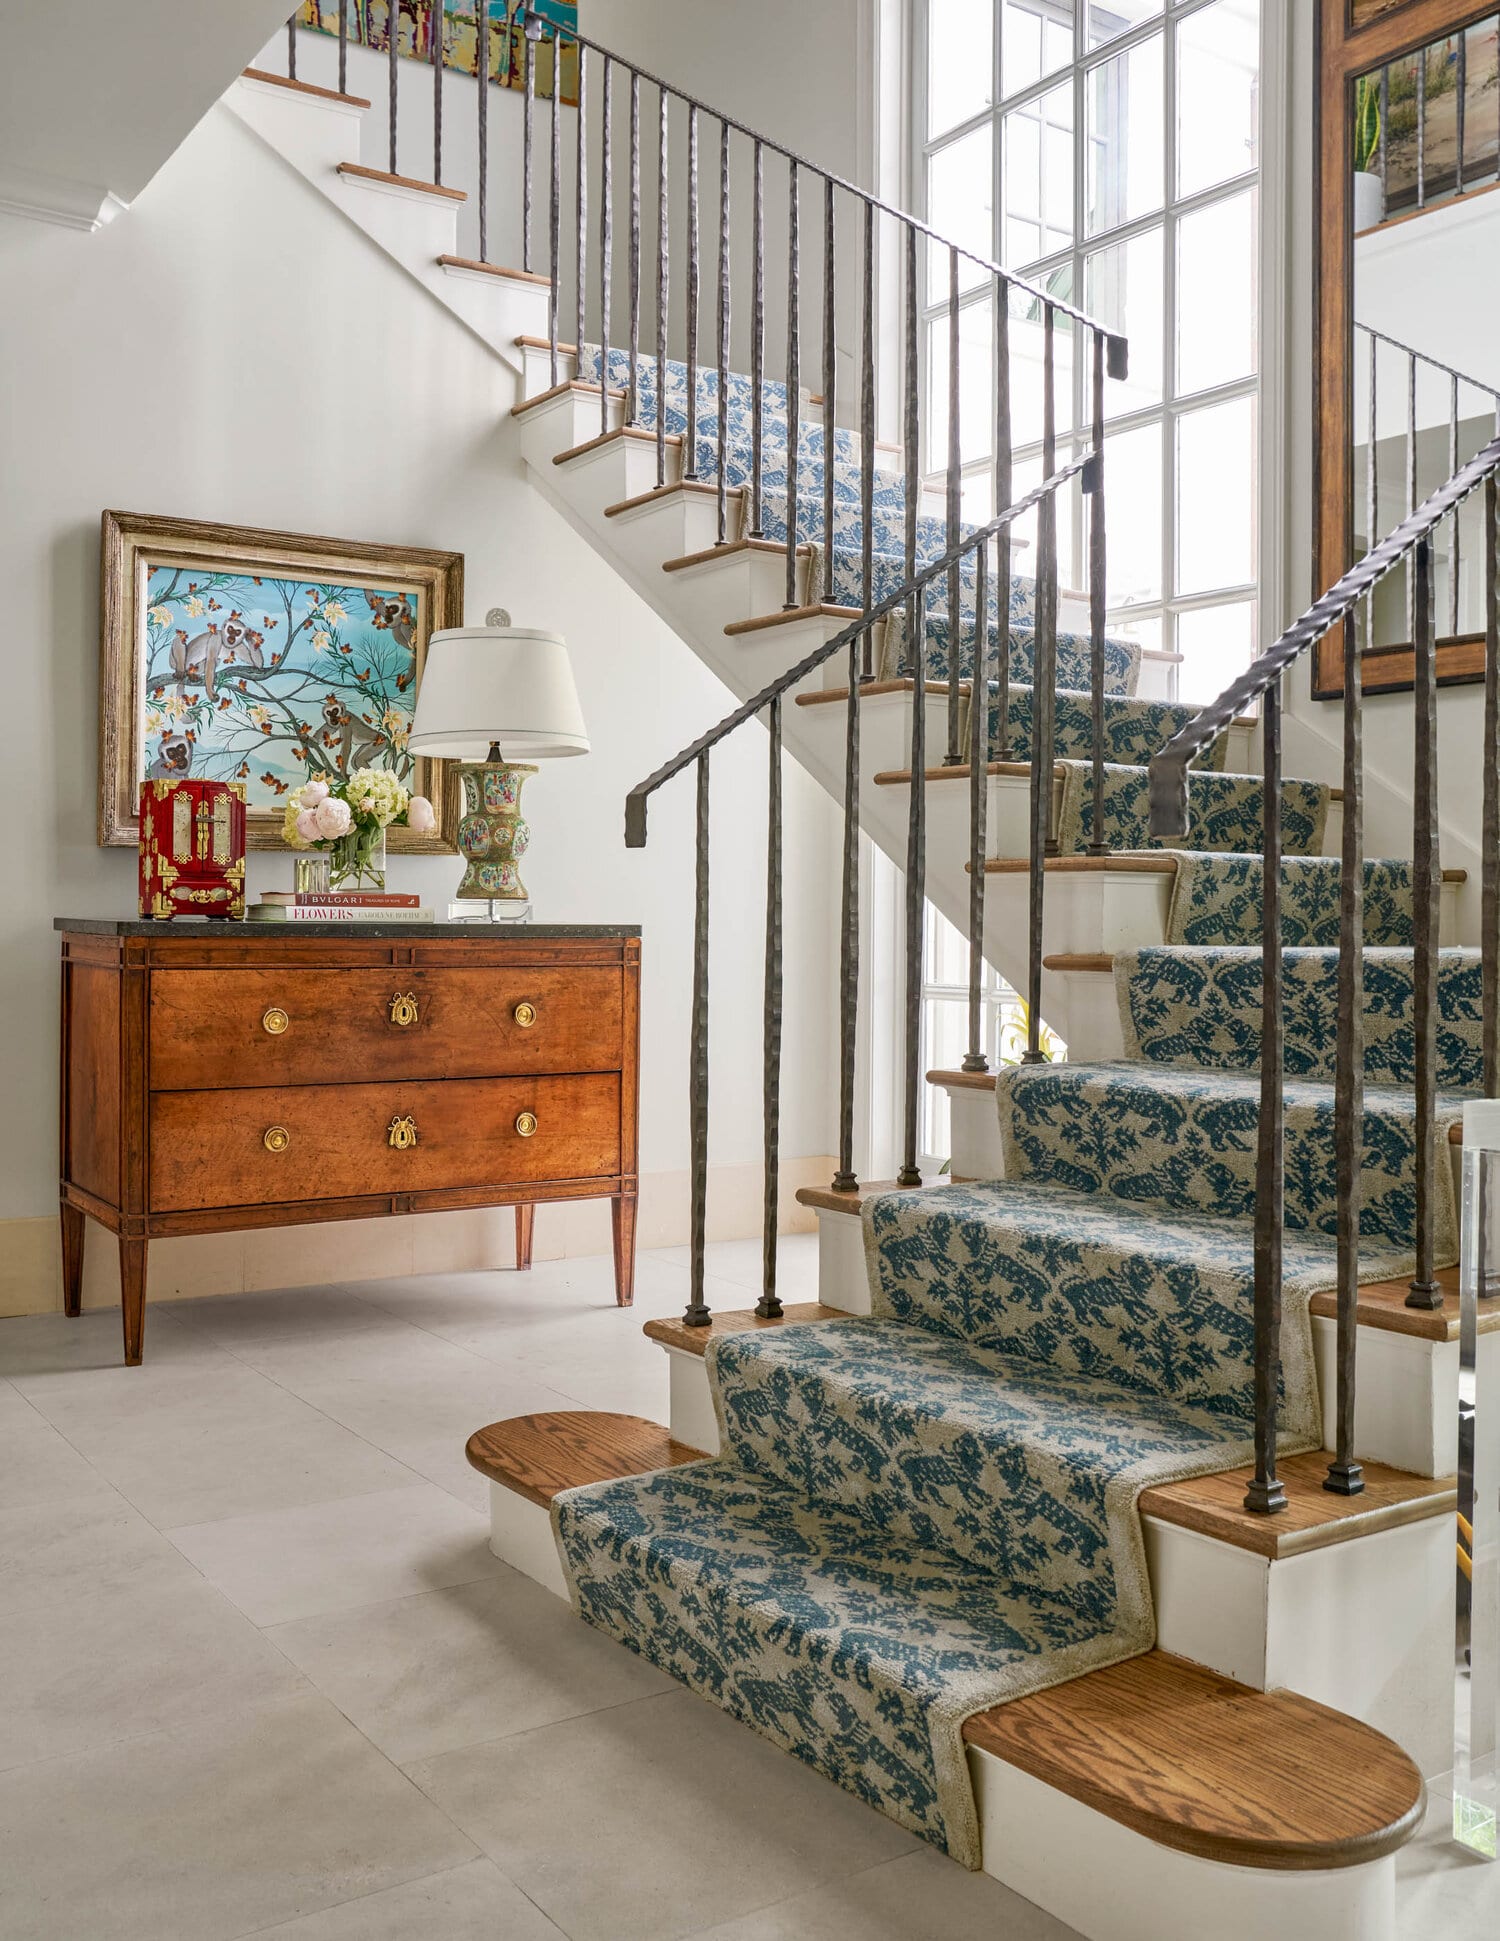 Refined and restful house tour - Jenkins Interiors - Nathan Schroder Photography - beams - blue and white - staircase. - entry - welcome - foyer 